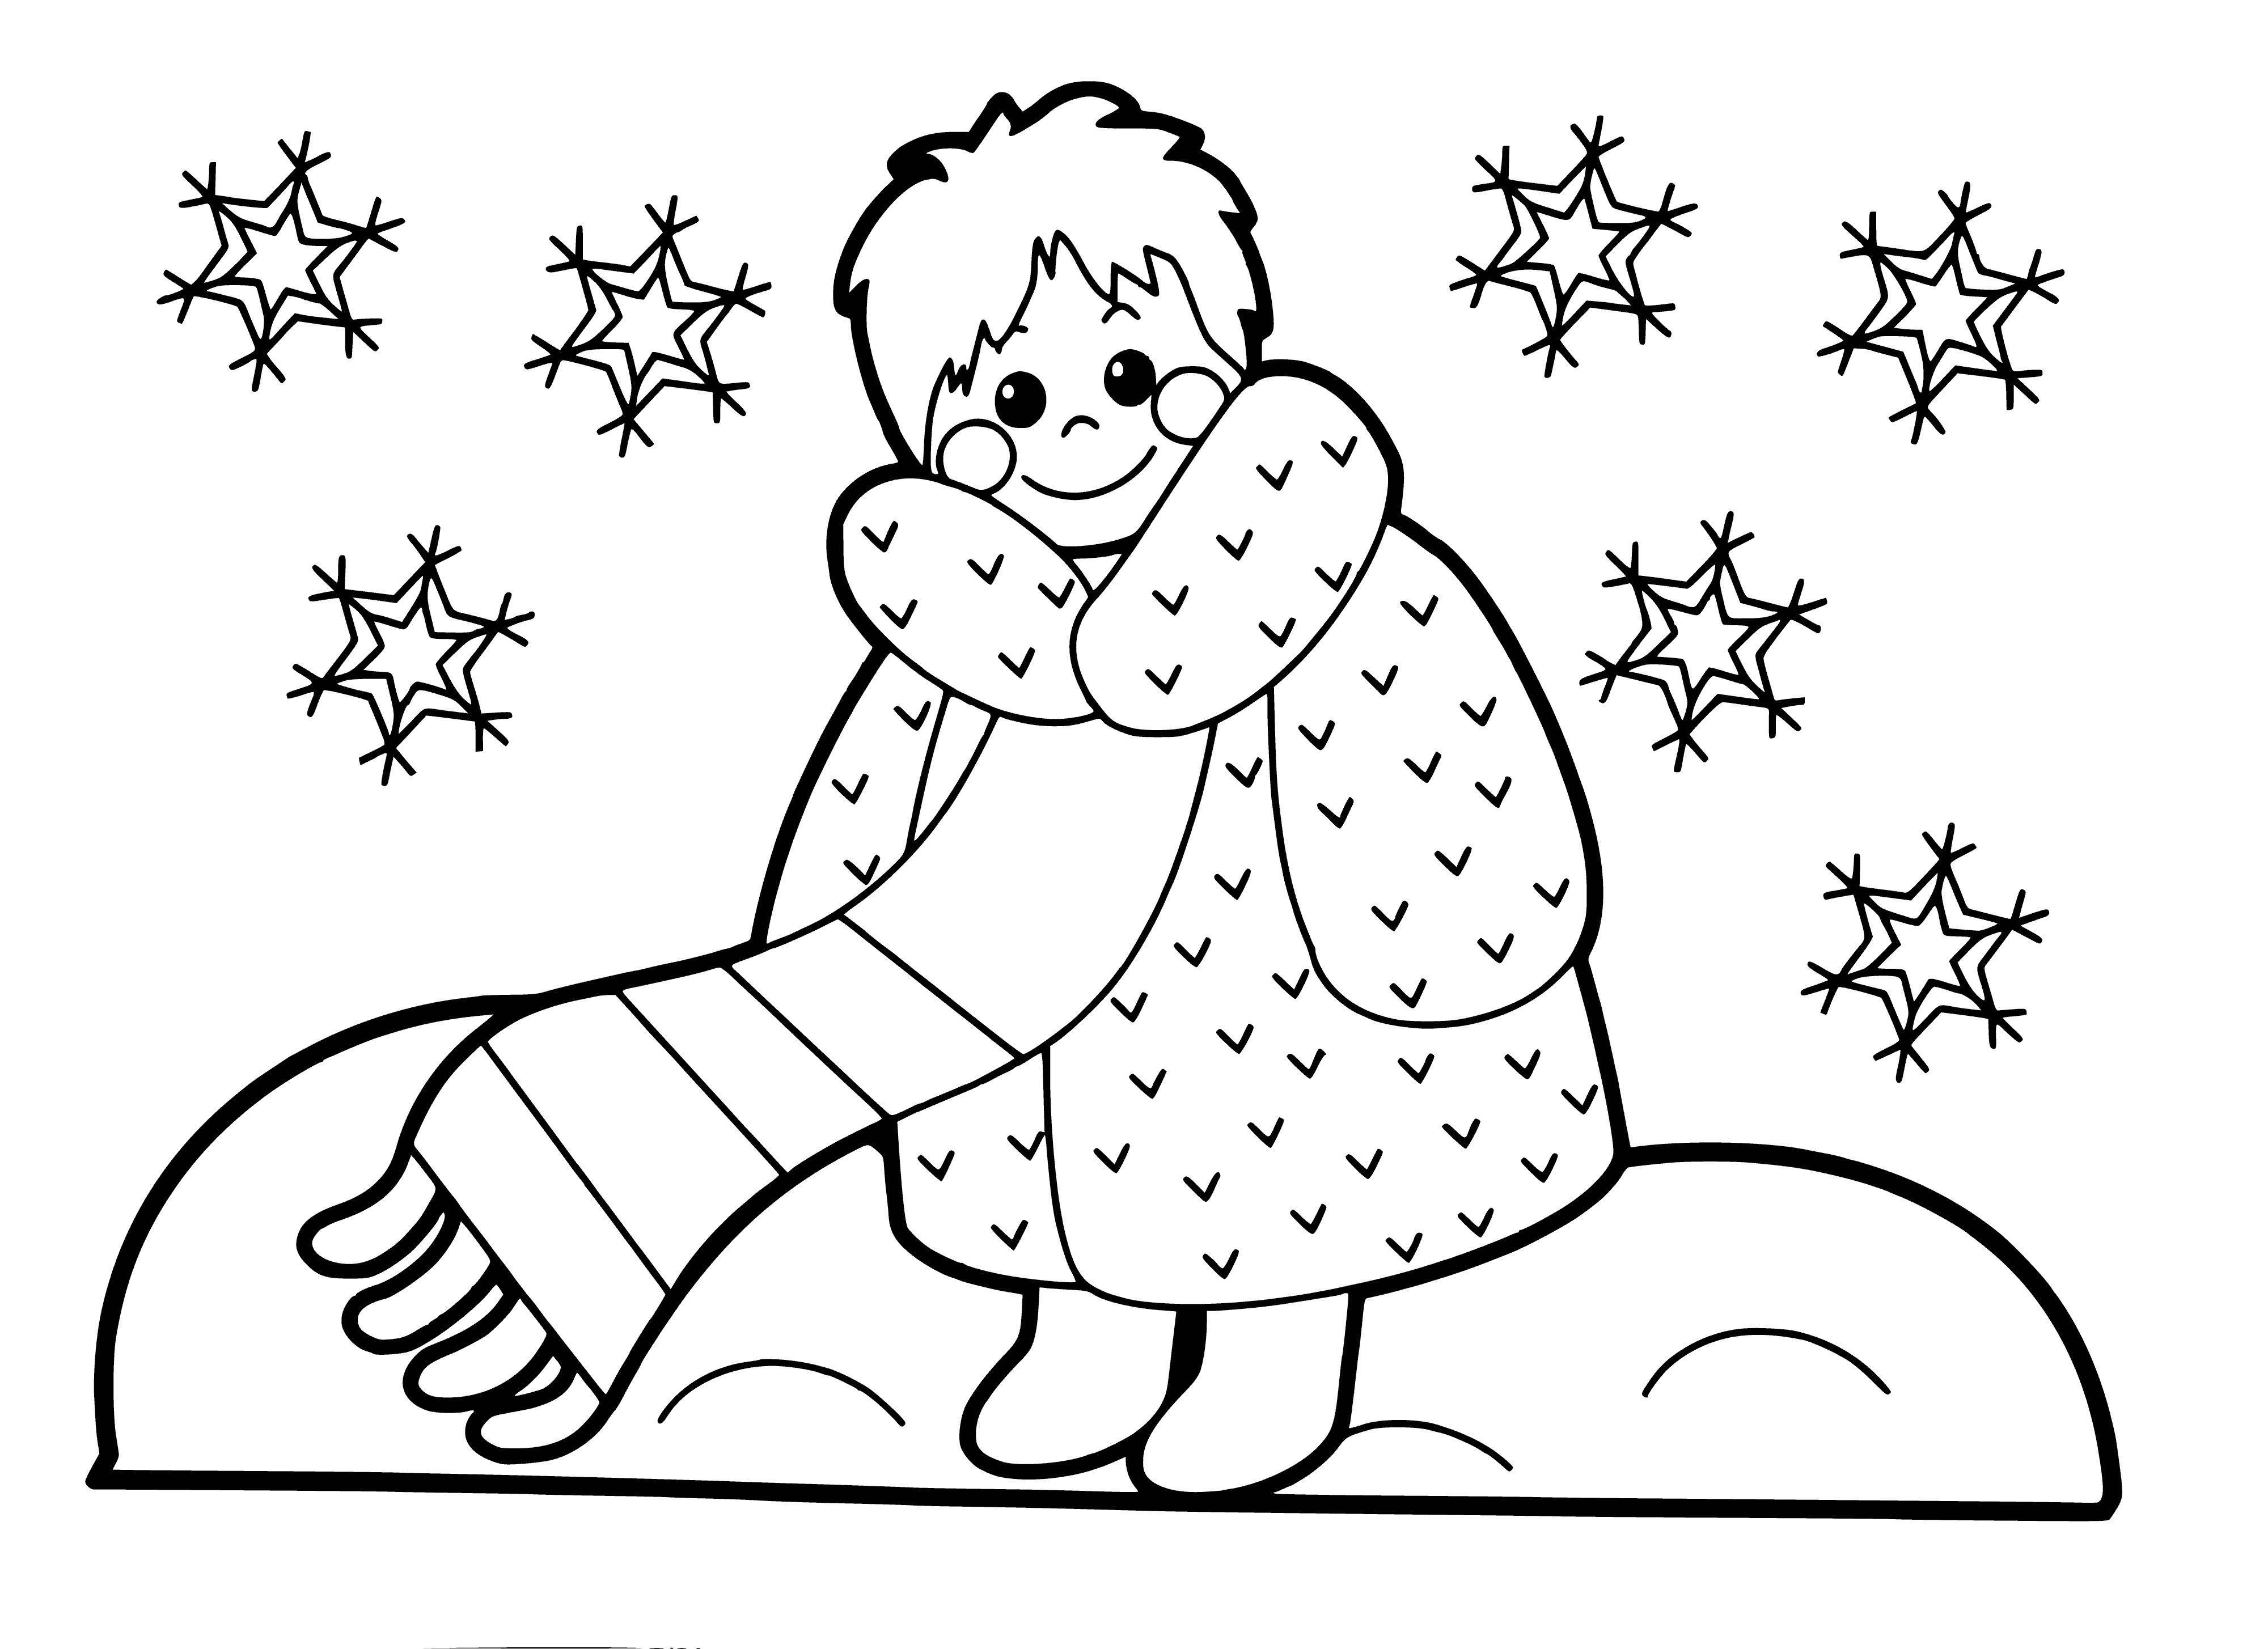 coloring page: Girl dressed for Winter happily standing outside despite the chill.